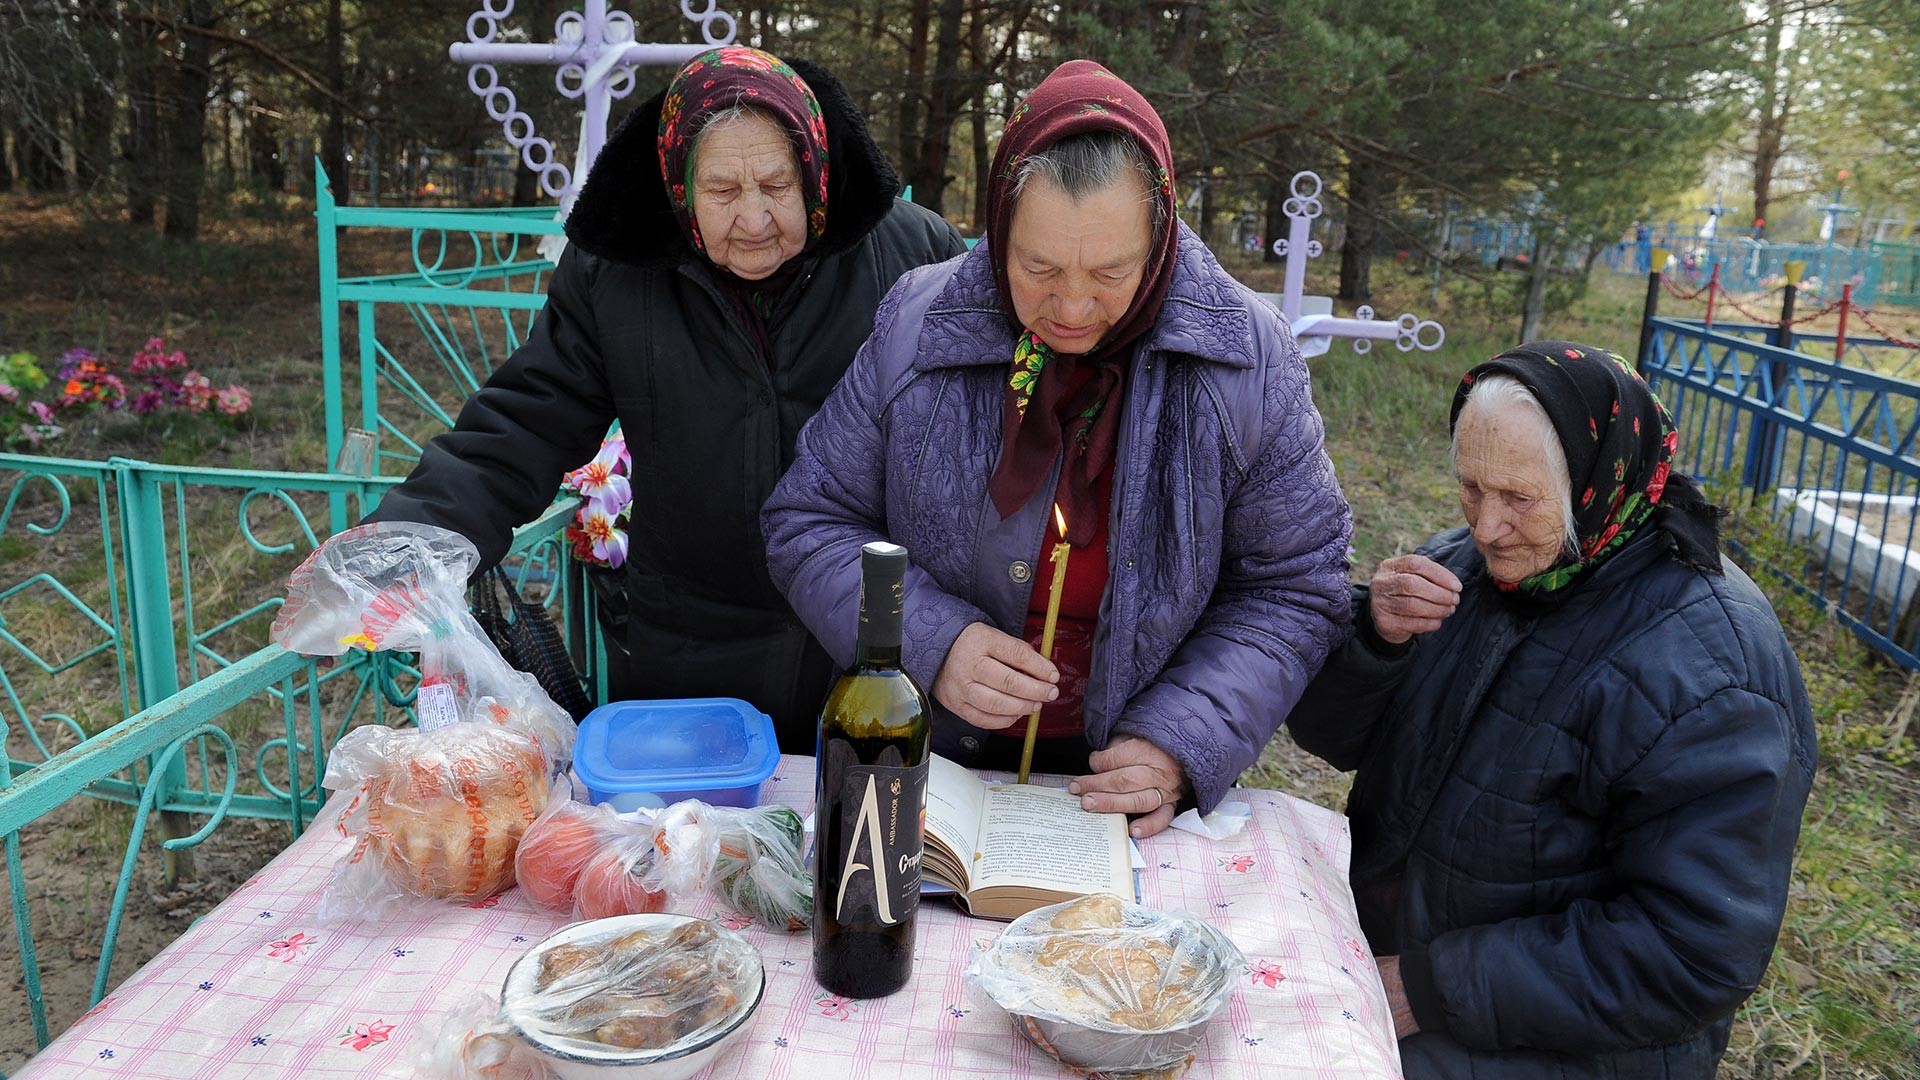 Old women commemorate their departed friend at her gravesite.